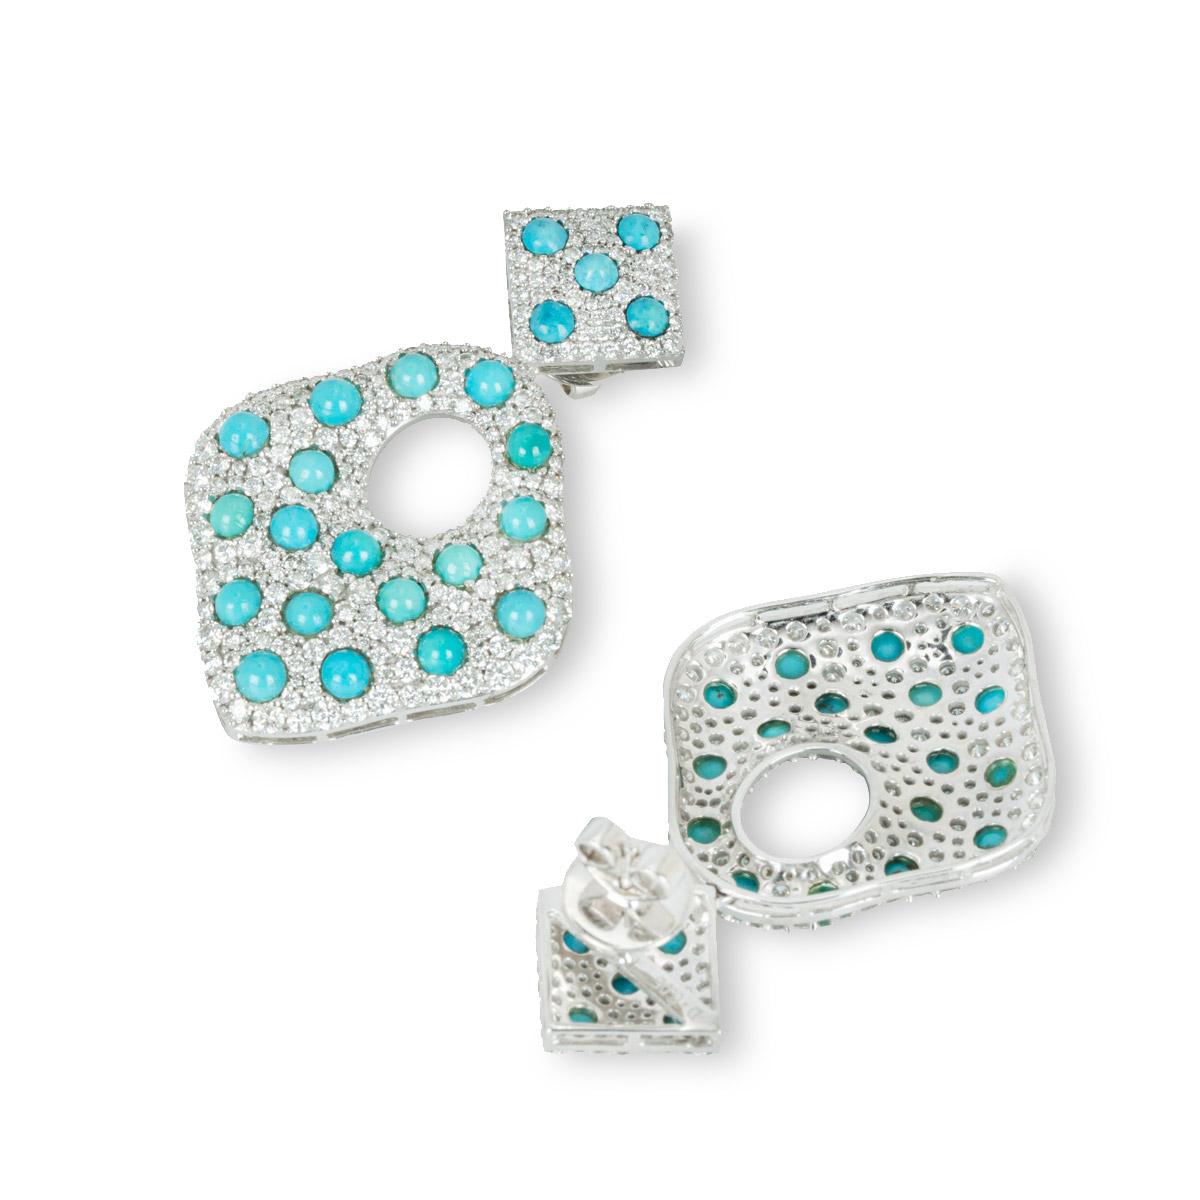 Diamond and Turquoise Drop Earrings 6.02 Carats In New Condition For Sale In London, GB